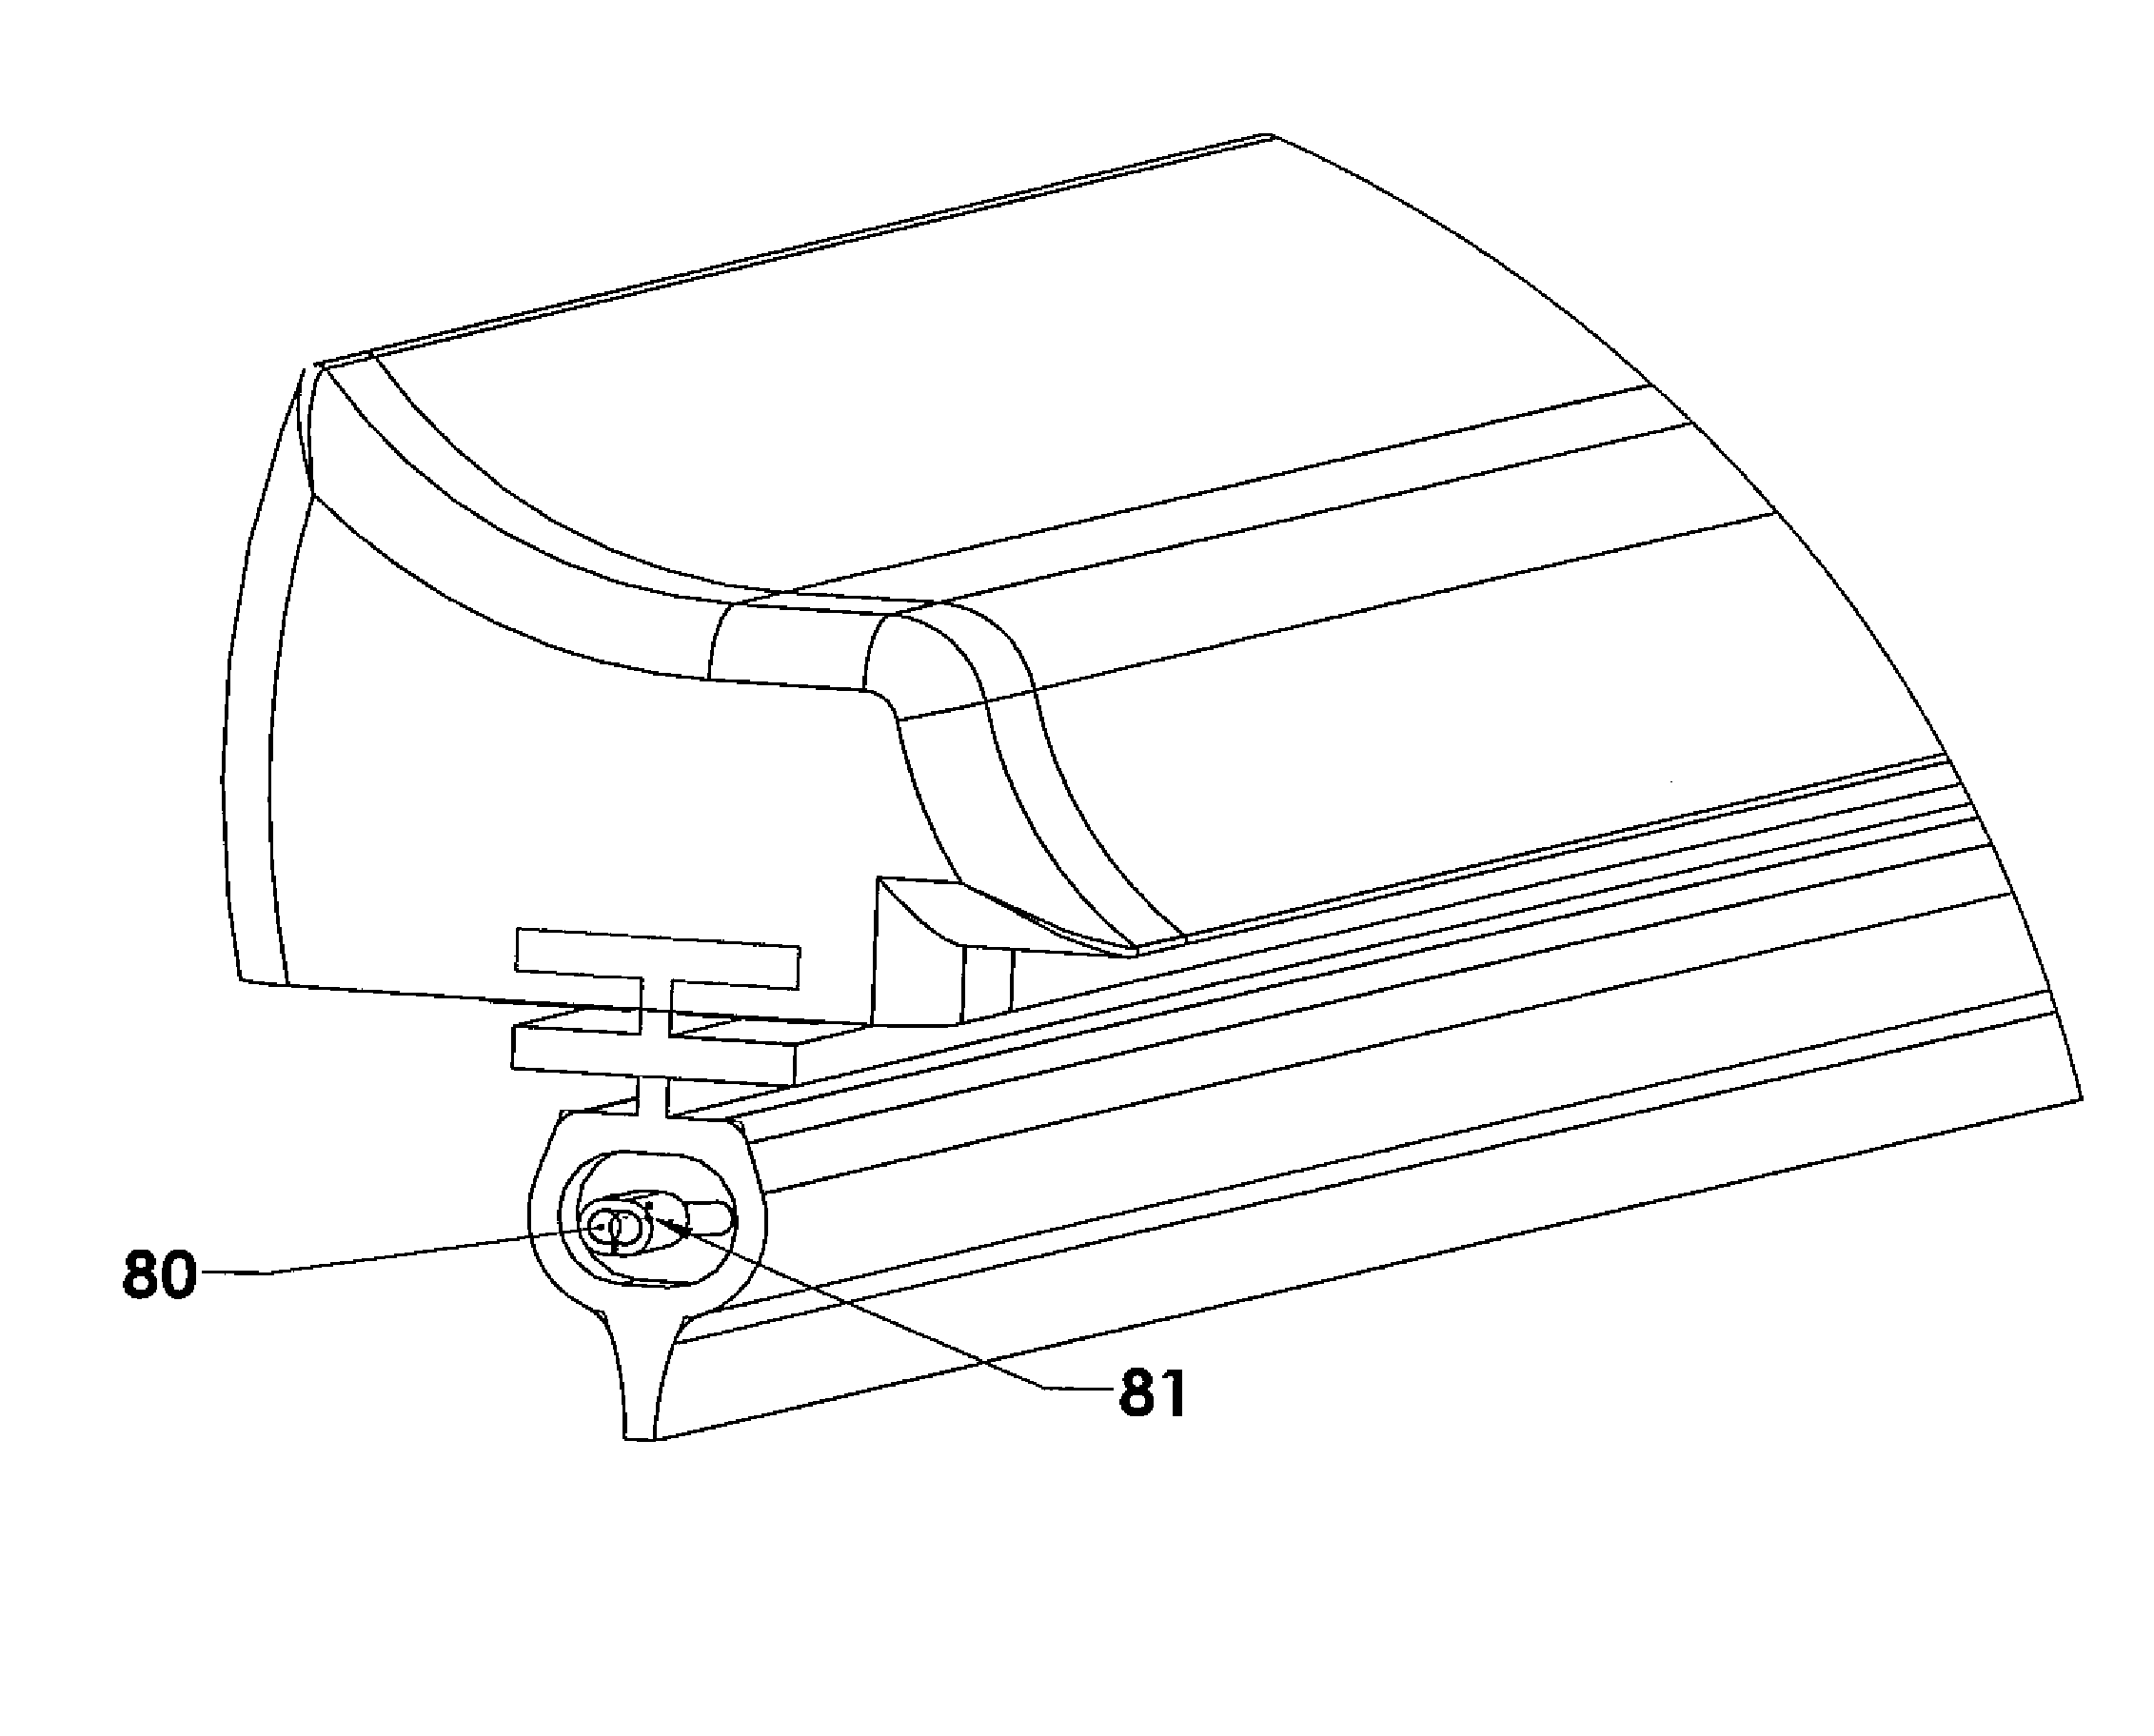 Heated Windshield Wiper System for Vehicle